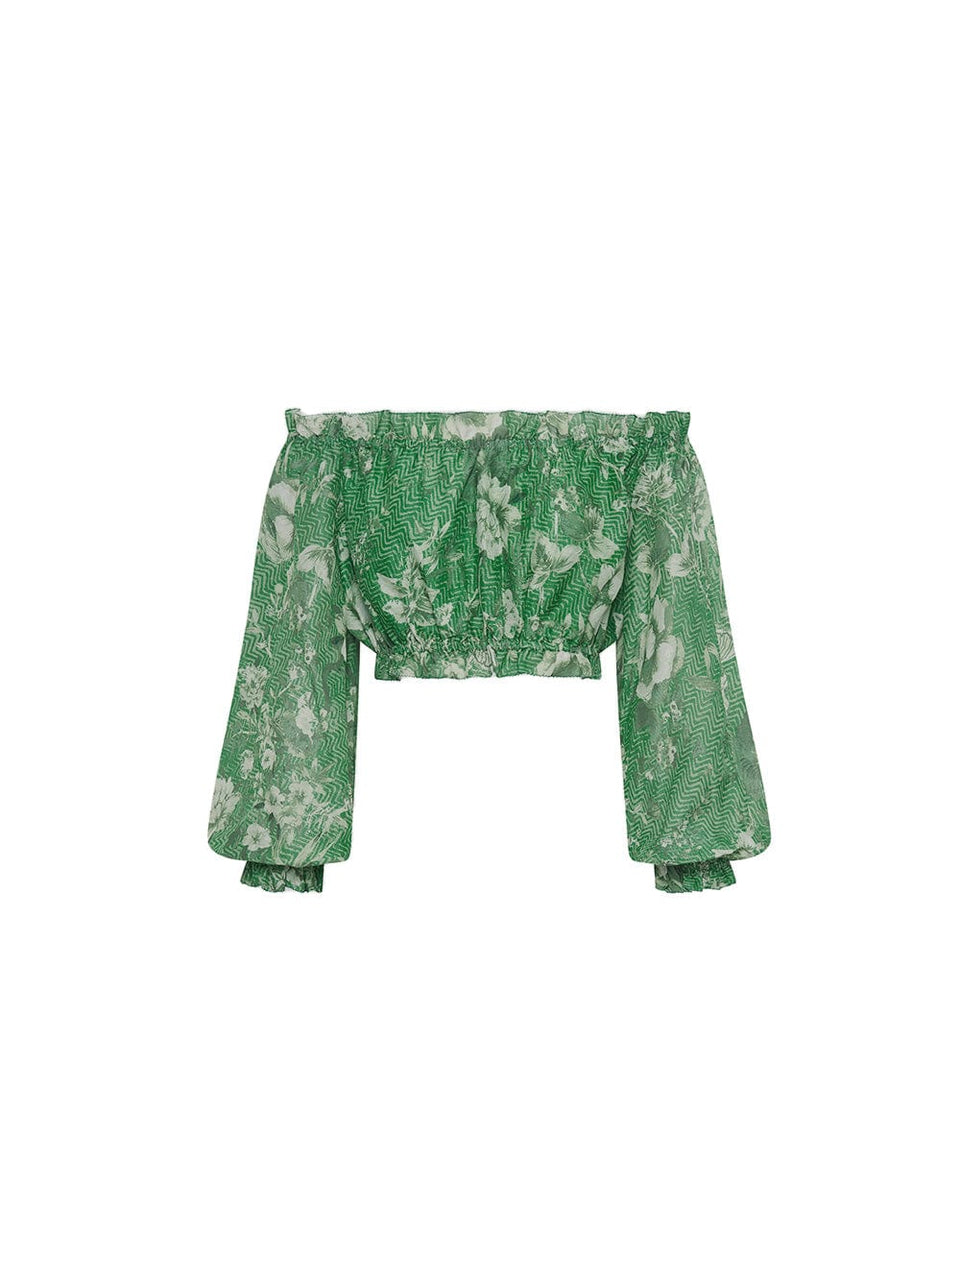 Ghost image of KIVARI Khalo Crop Top: A green floral off-the-shoulder top with full-length blouson sleeves and elasticated bust, waist and sleeve details.